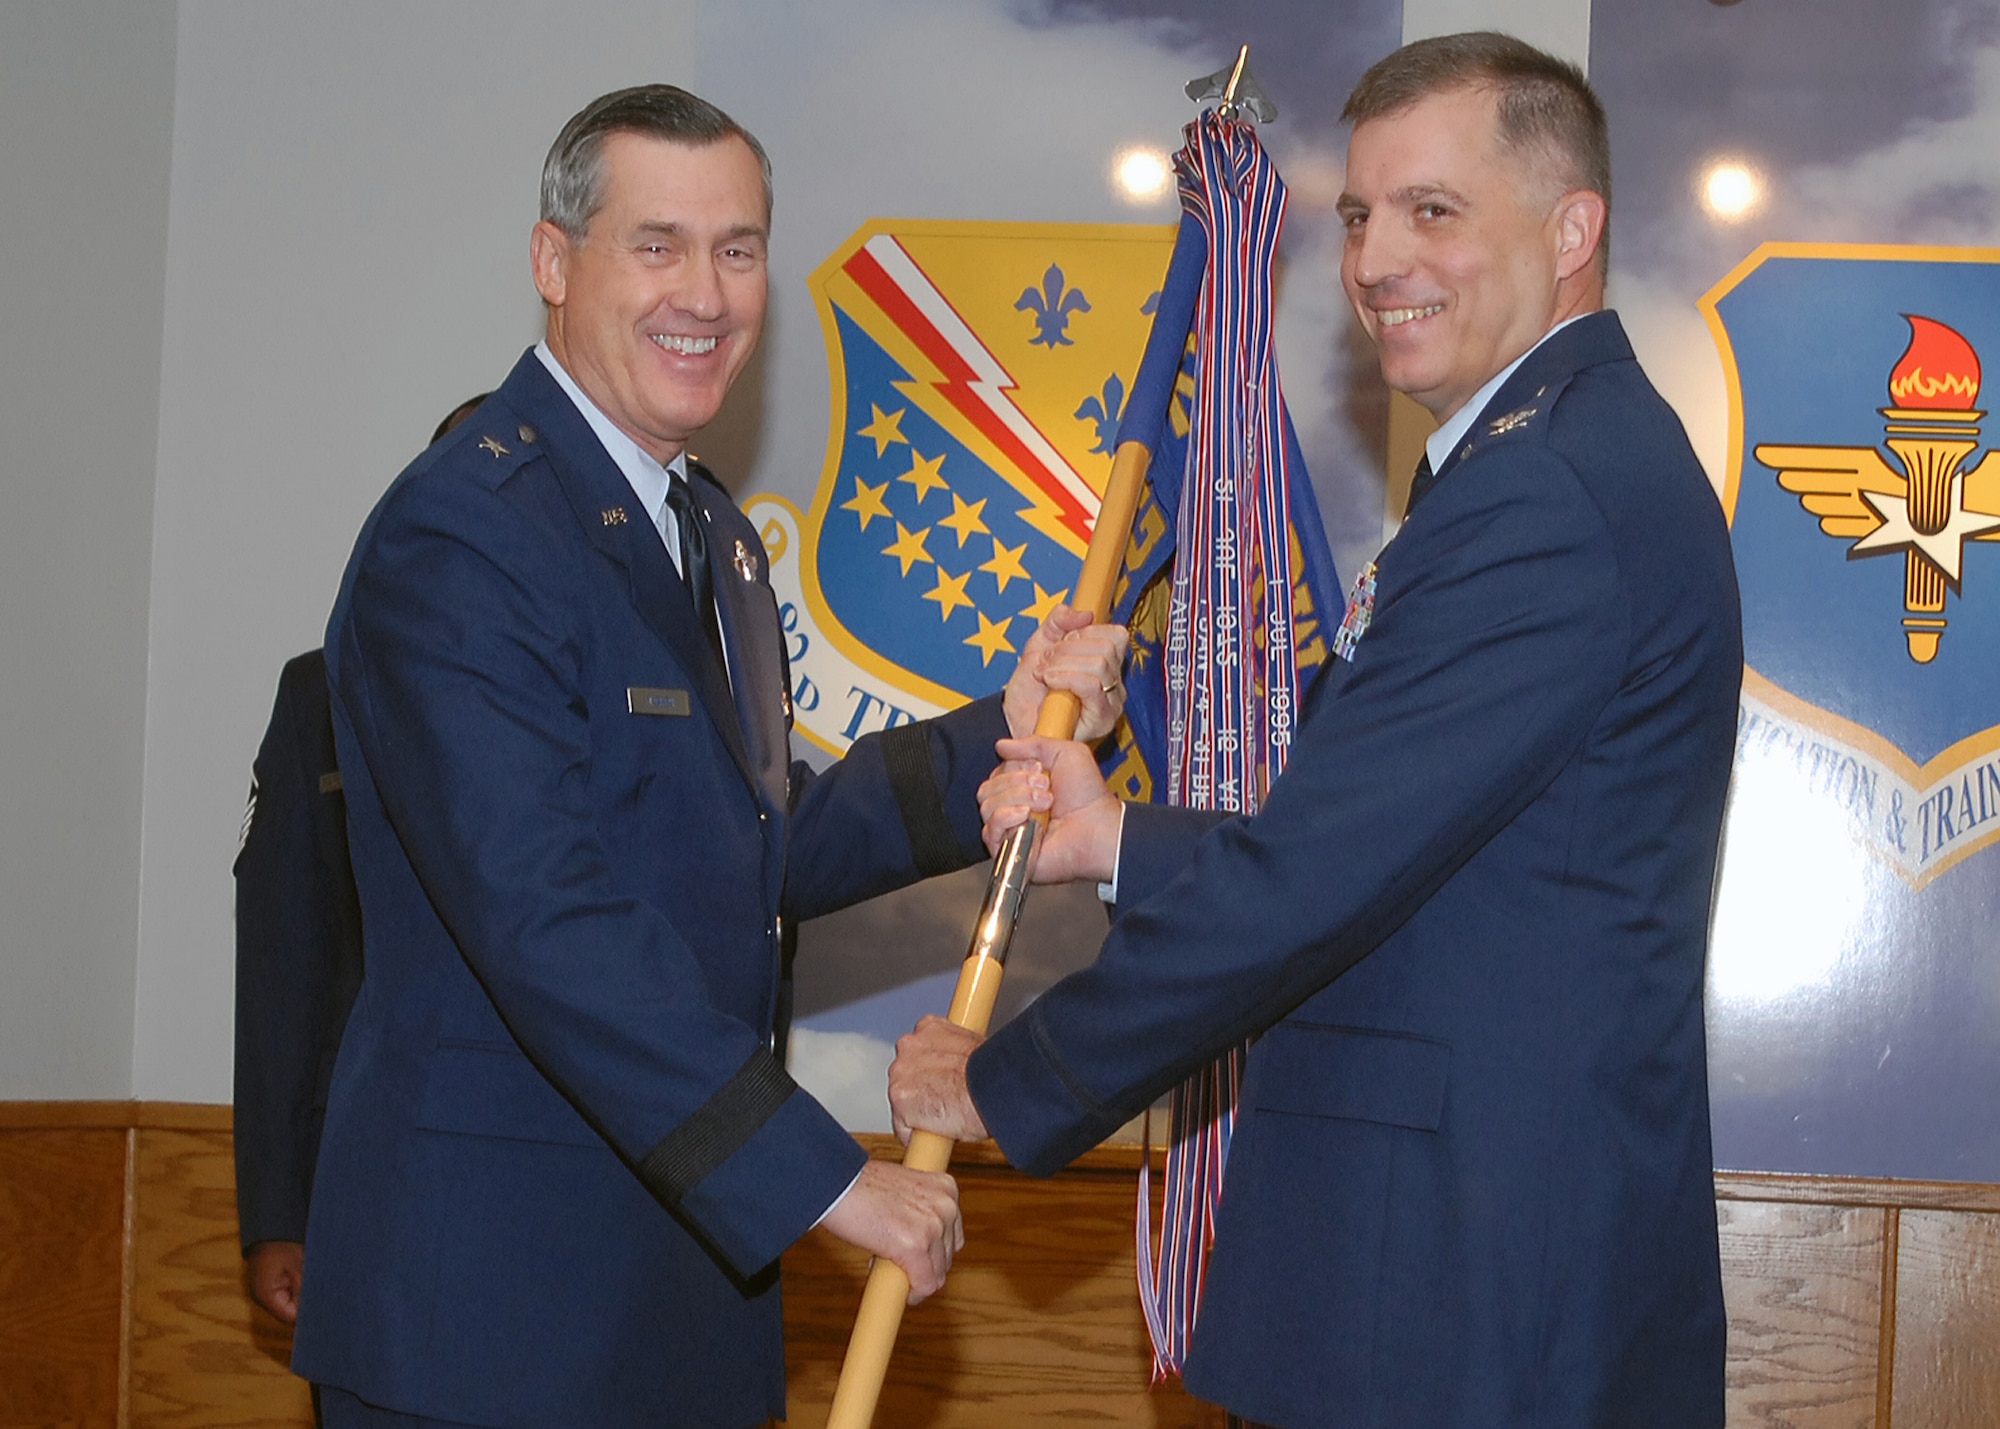 Brig. Gen. O.G. Mannon, 82nd Training Wing commander, passes off the guidon of the 982nd Training Group to its new commander, Col. John Rausch. Colonel Rausch accepted the command Sept. 30, replacing Col. David Norsworthy. Colonel Norsworthy now serves as the 82nd TRW vice commander. (U.S. Air Force photo/Lou Anne Sledge)